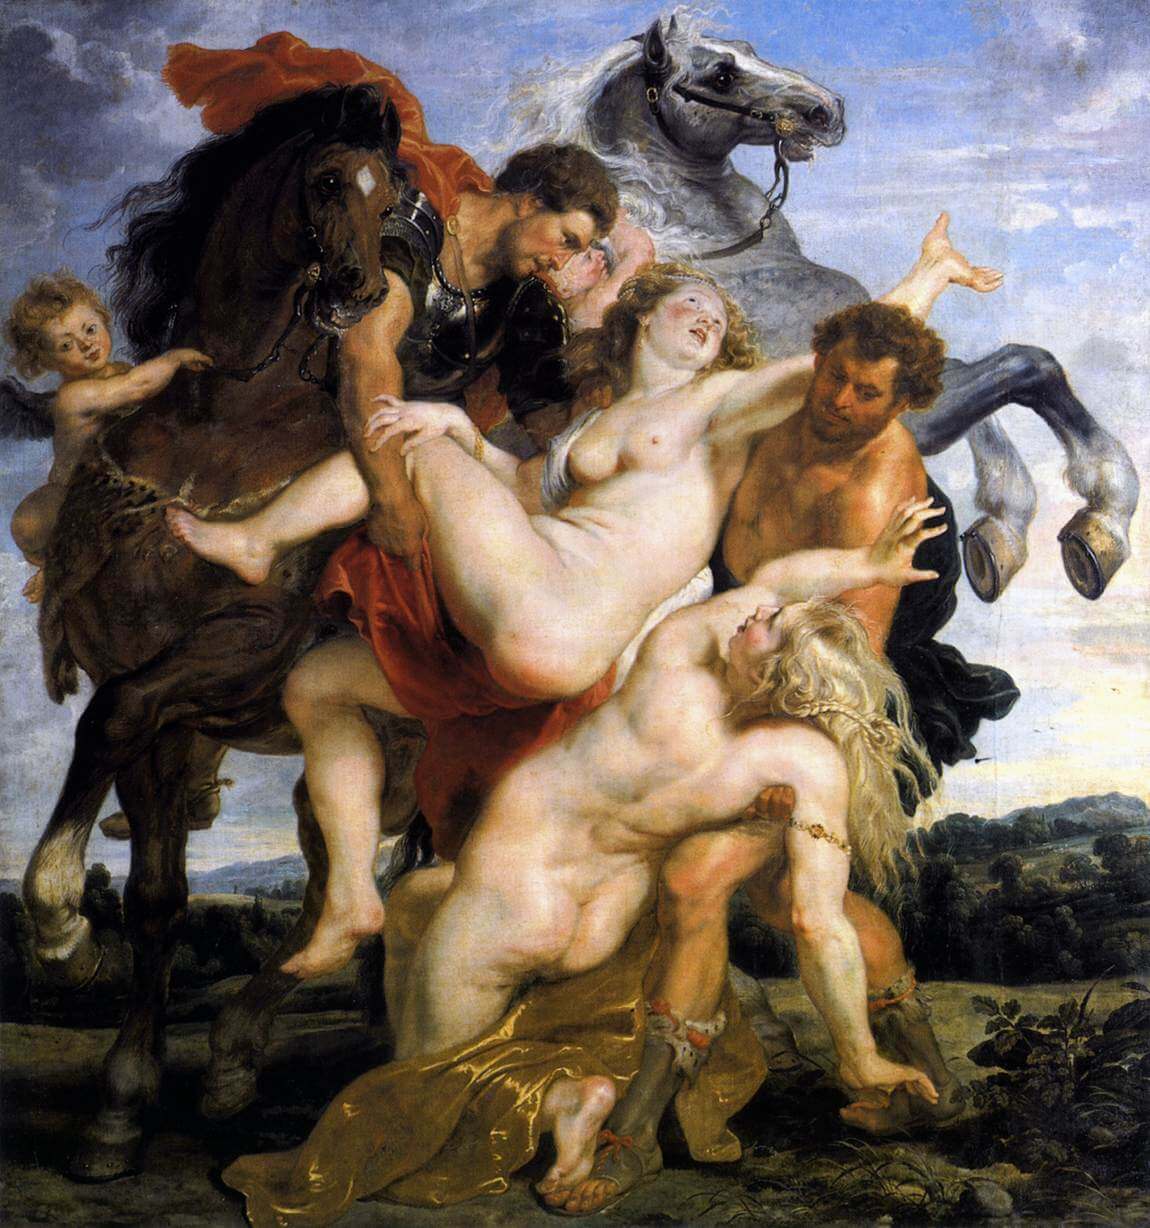 The Rape of the Daughters of Leucippus, 1617 by Peter Paul Rubens